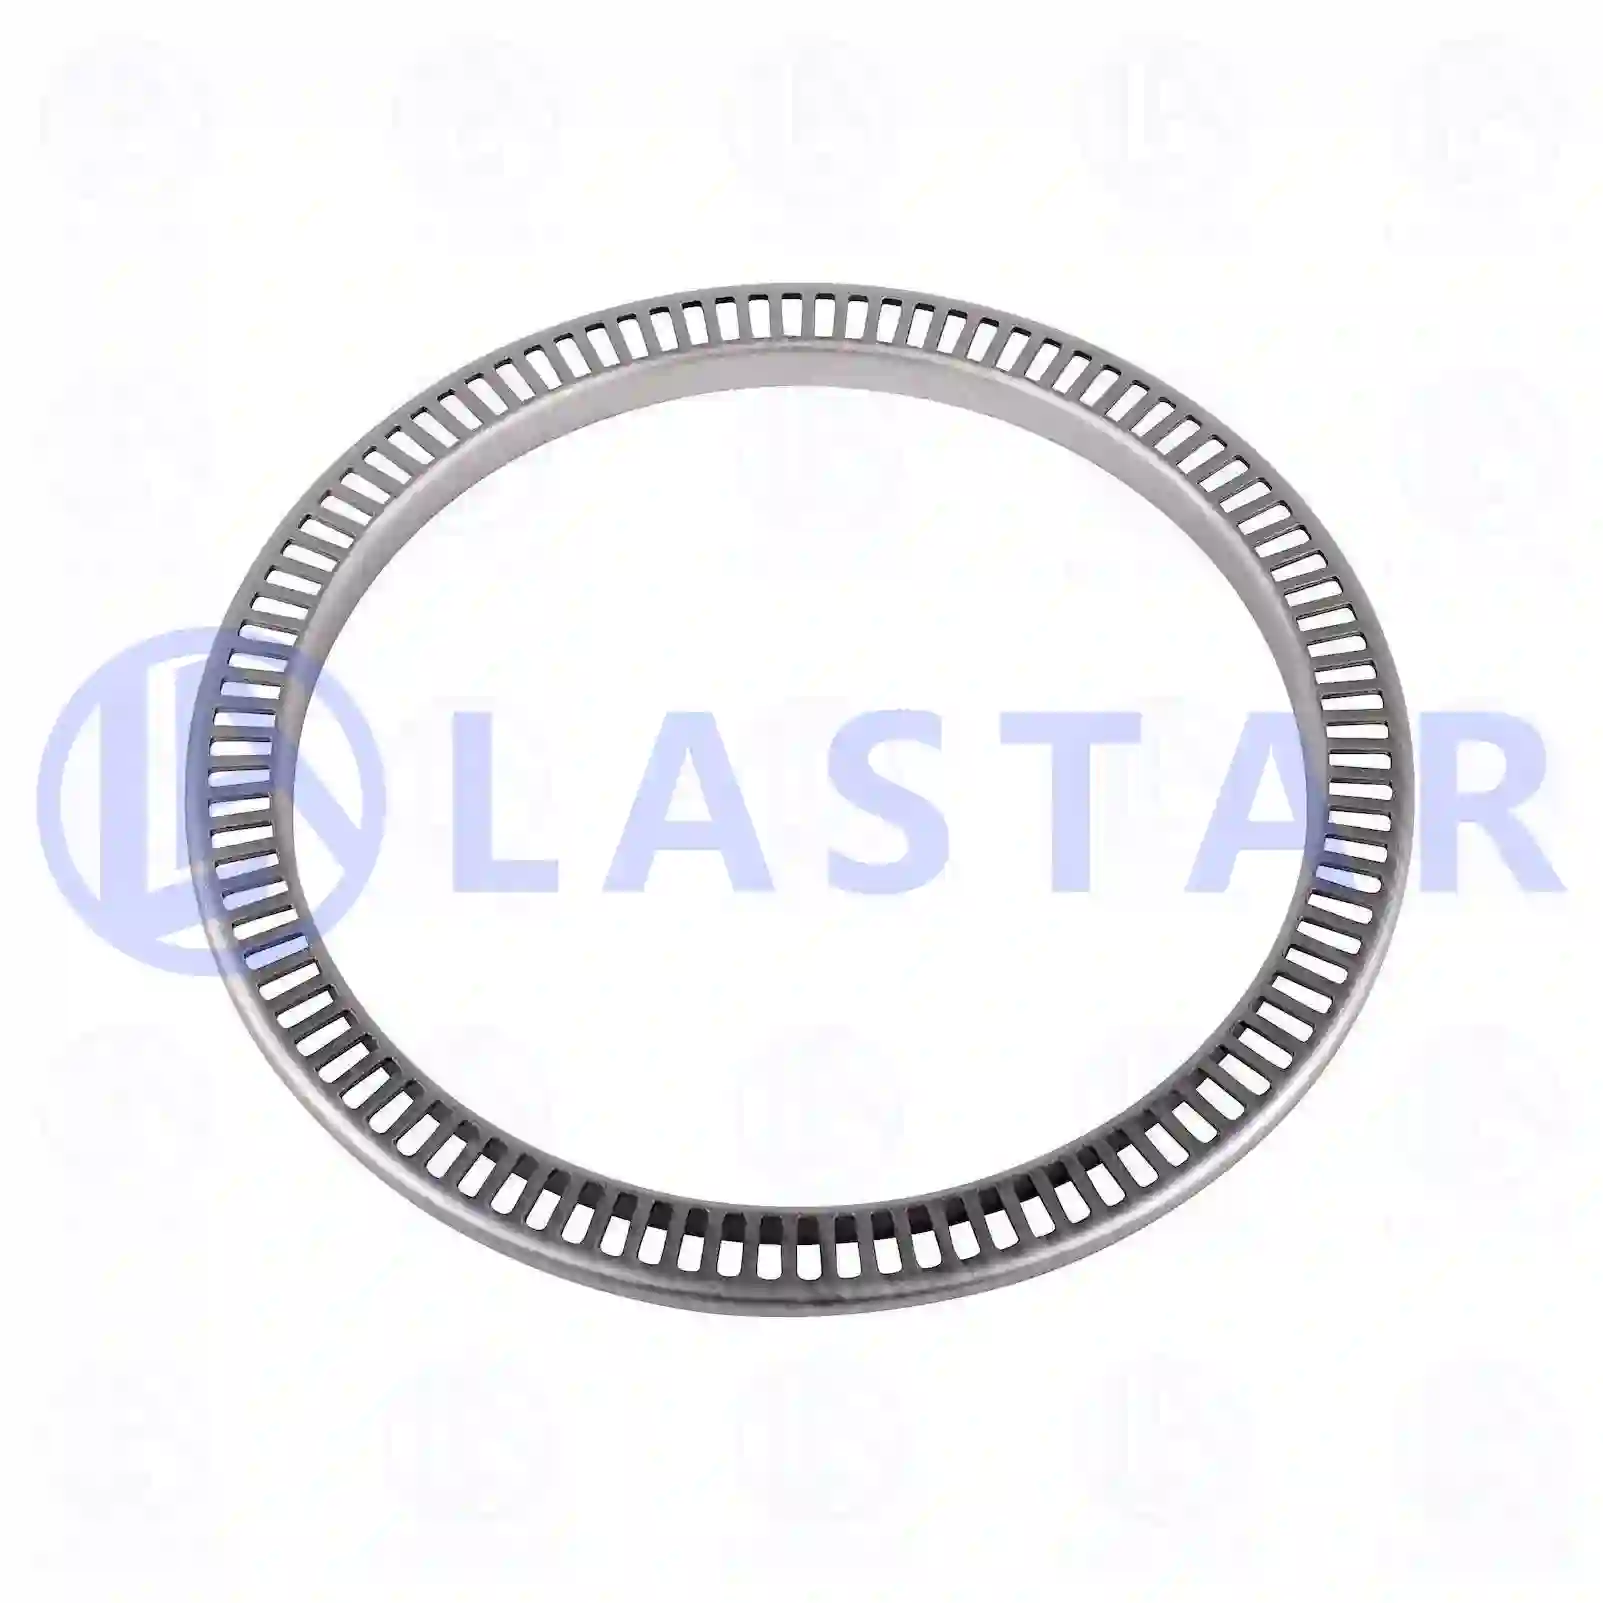 ABS ring, 77726346, 9463340015, 9463340615, ZG50012-0008, ||  77726346 Lastar Spare Part | Truck Spare Parts, Auotomotive Spare Parts ABS ring, 77726346, 9463340015, 9463340615, ZG50012-0008, ||  77726346 Lastar Spare Part | Truck Spare Parts, Auotomotive Spare Parts